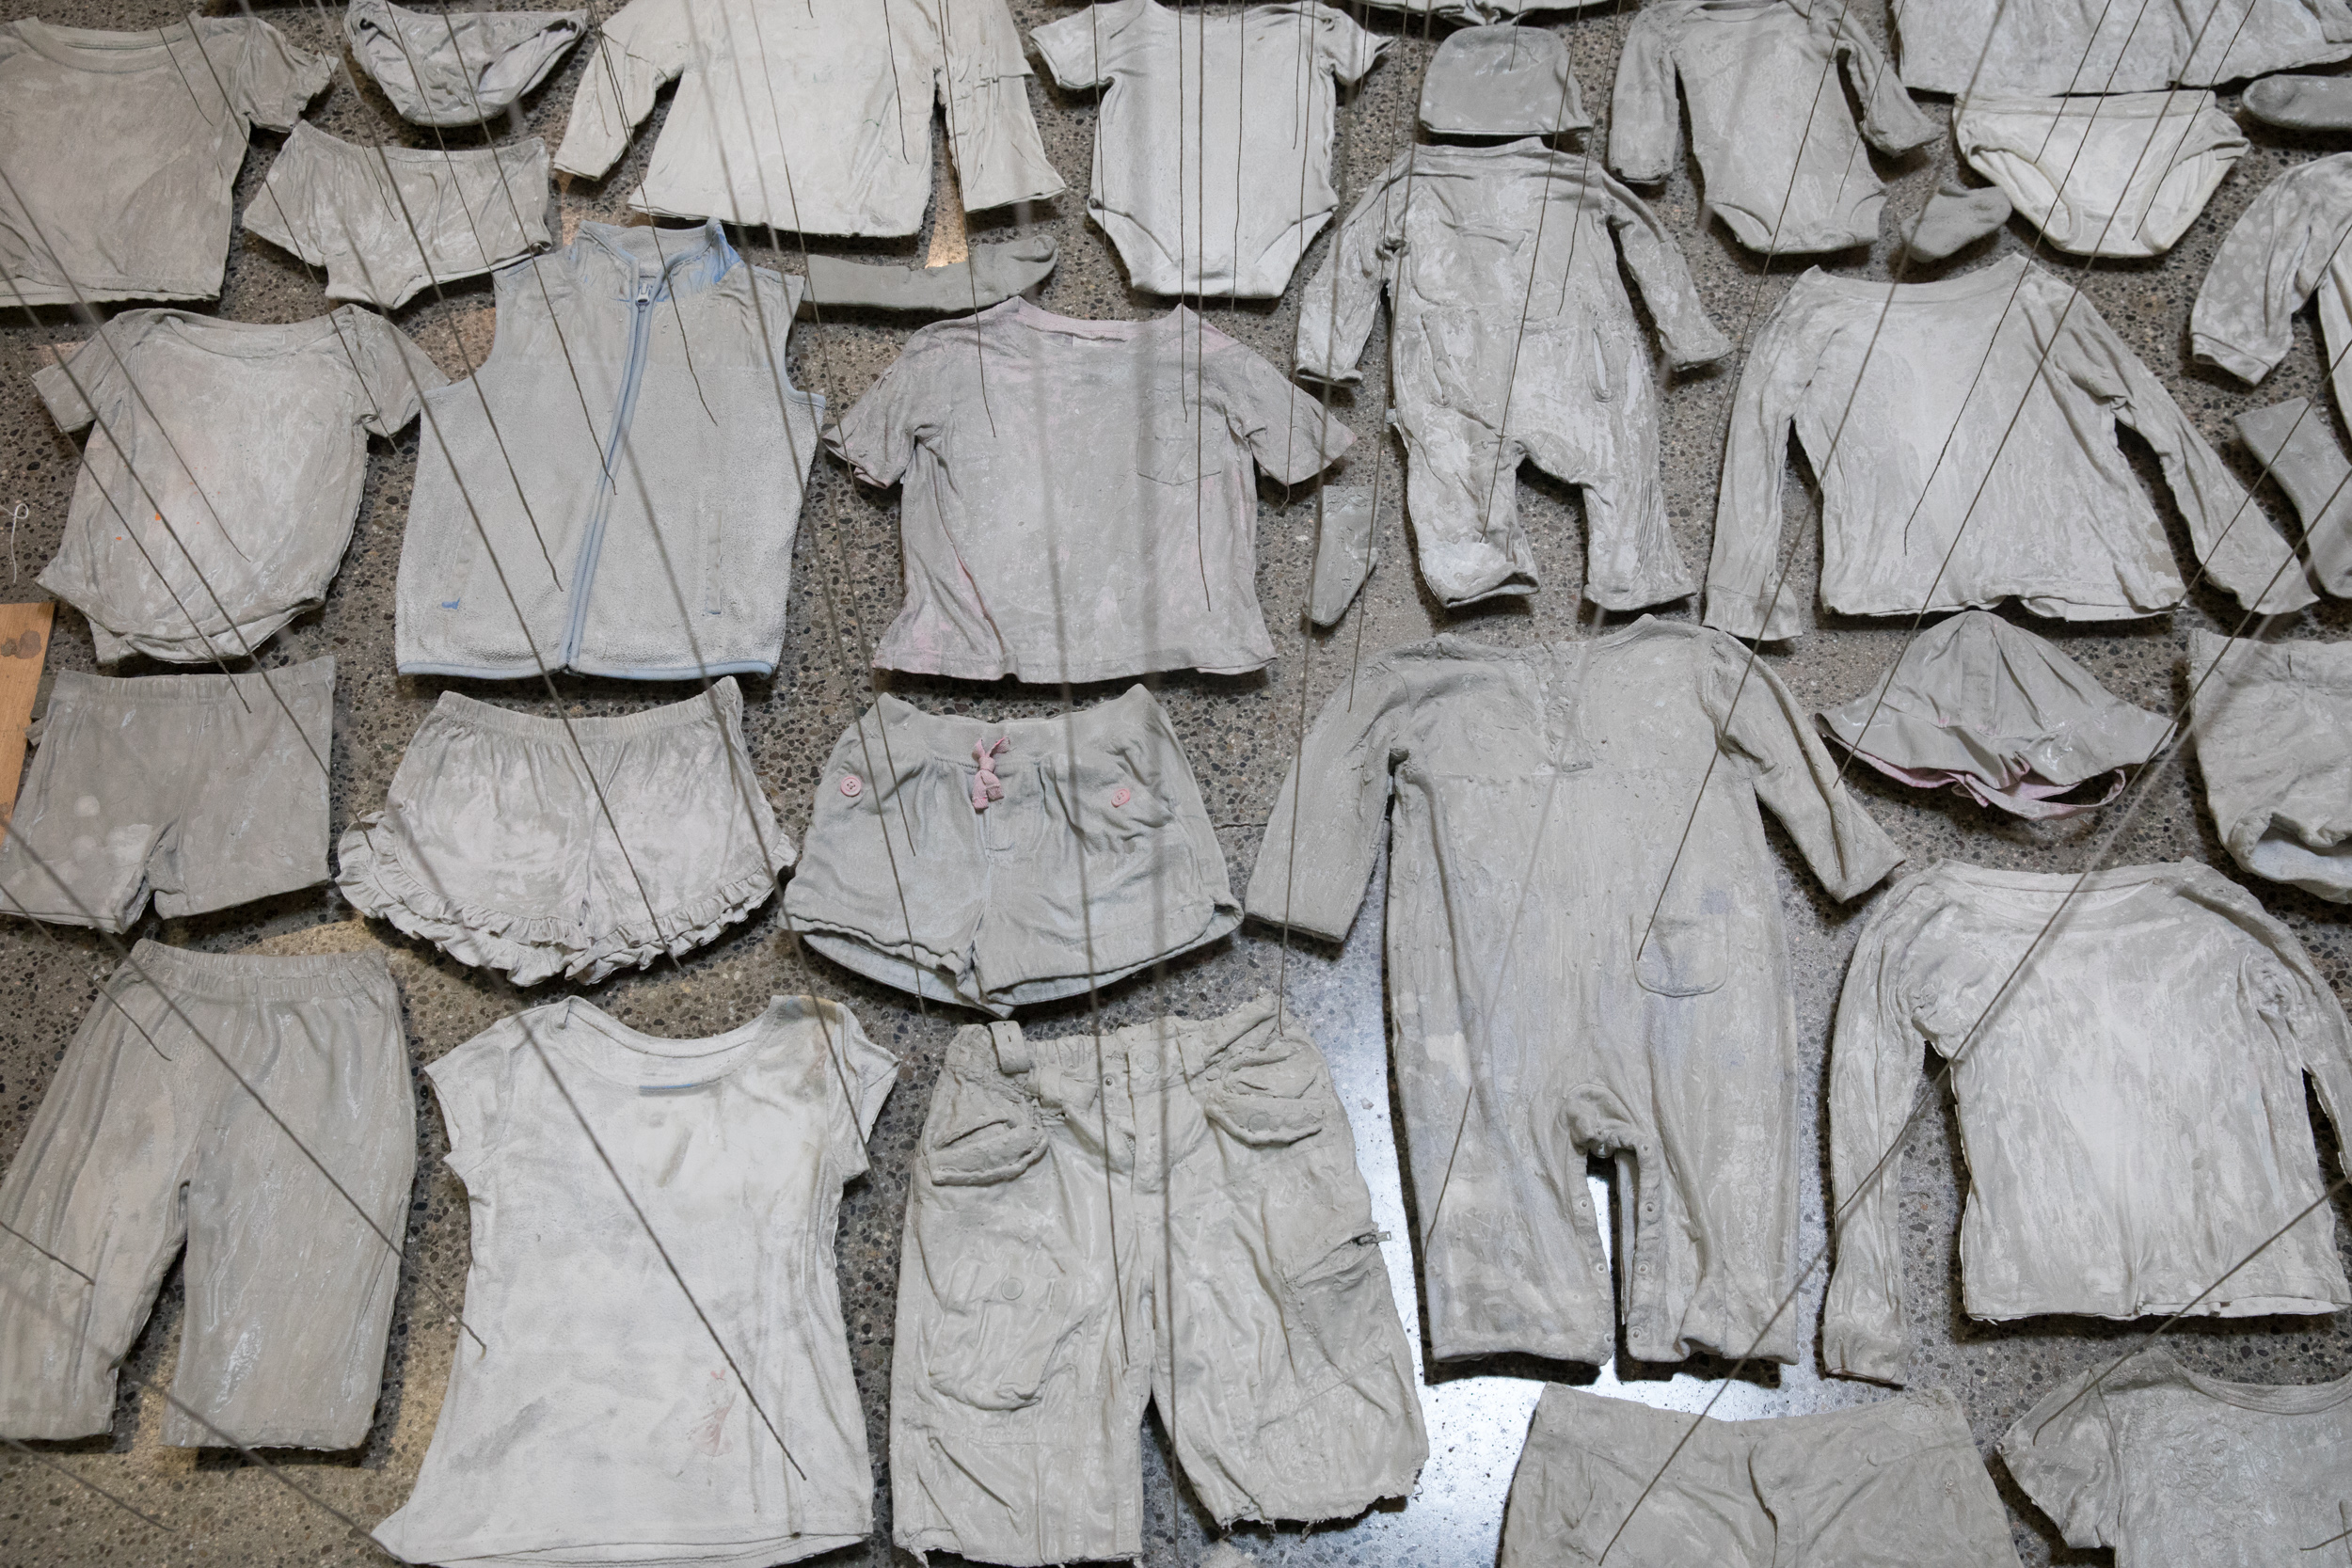 cemented children's clothes 